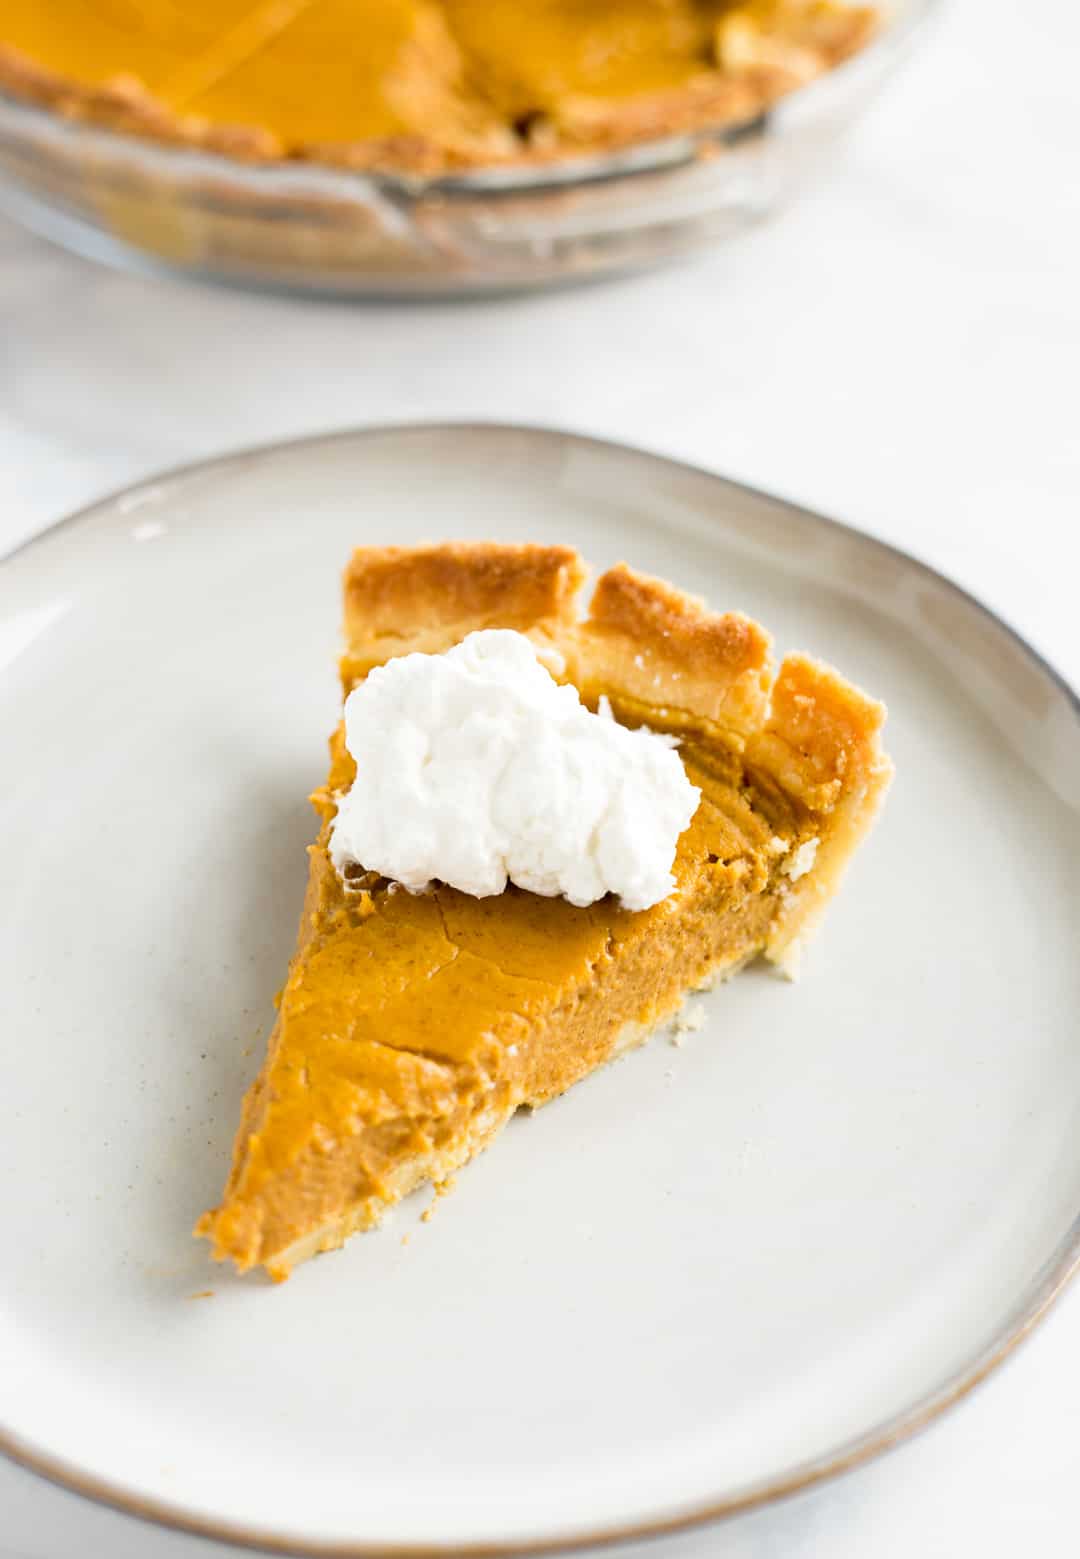 Slice of Keto Pumpkin Pie on a plate topped with whipped cream